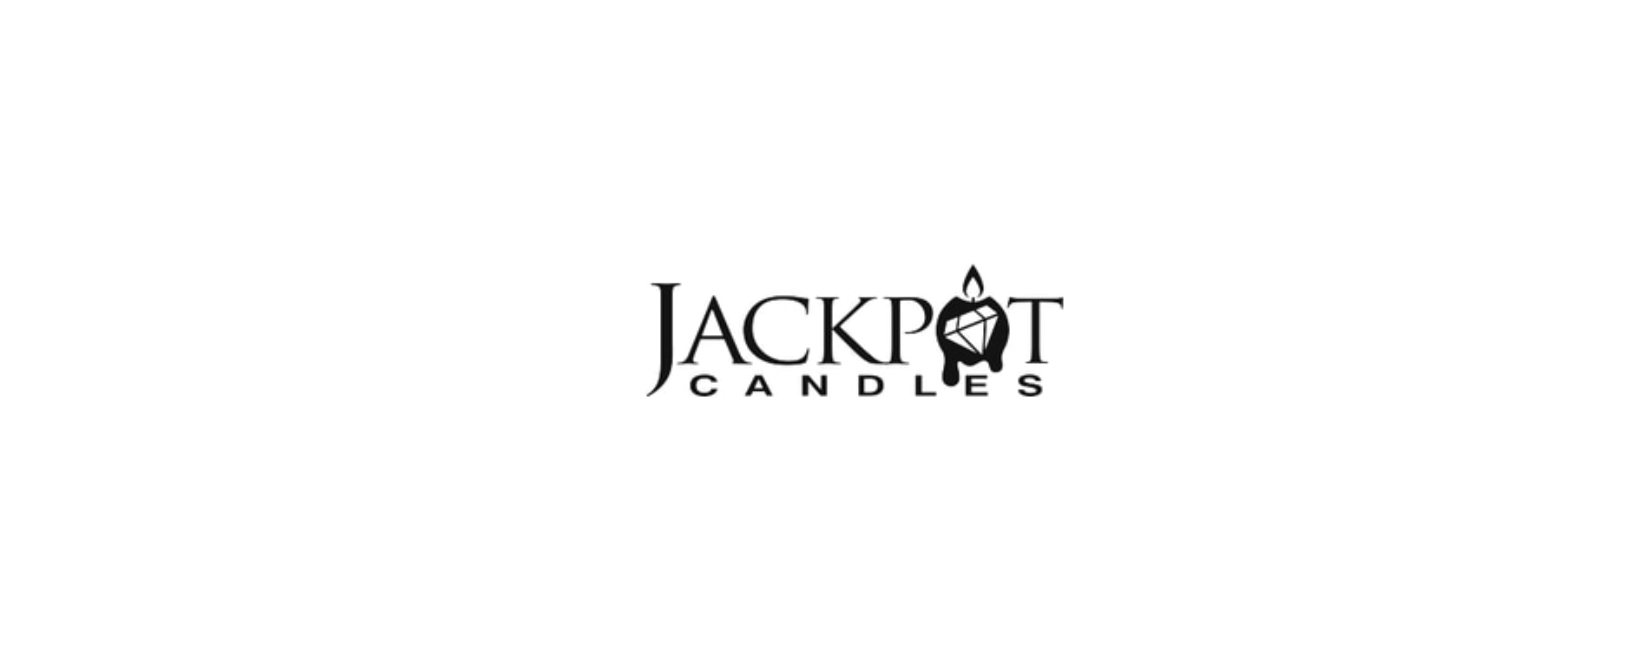 Jackpot Candle Discount Code 2022